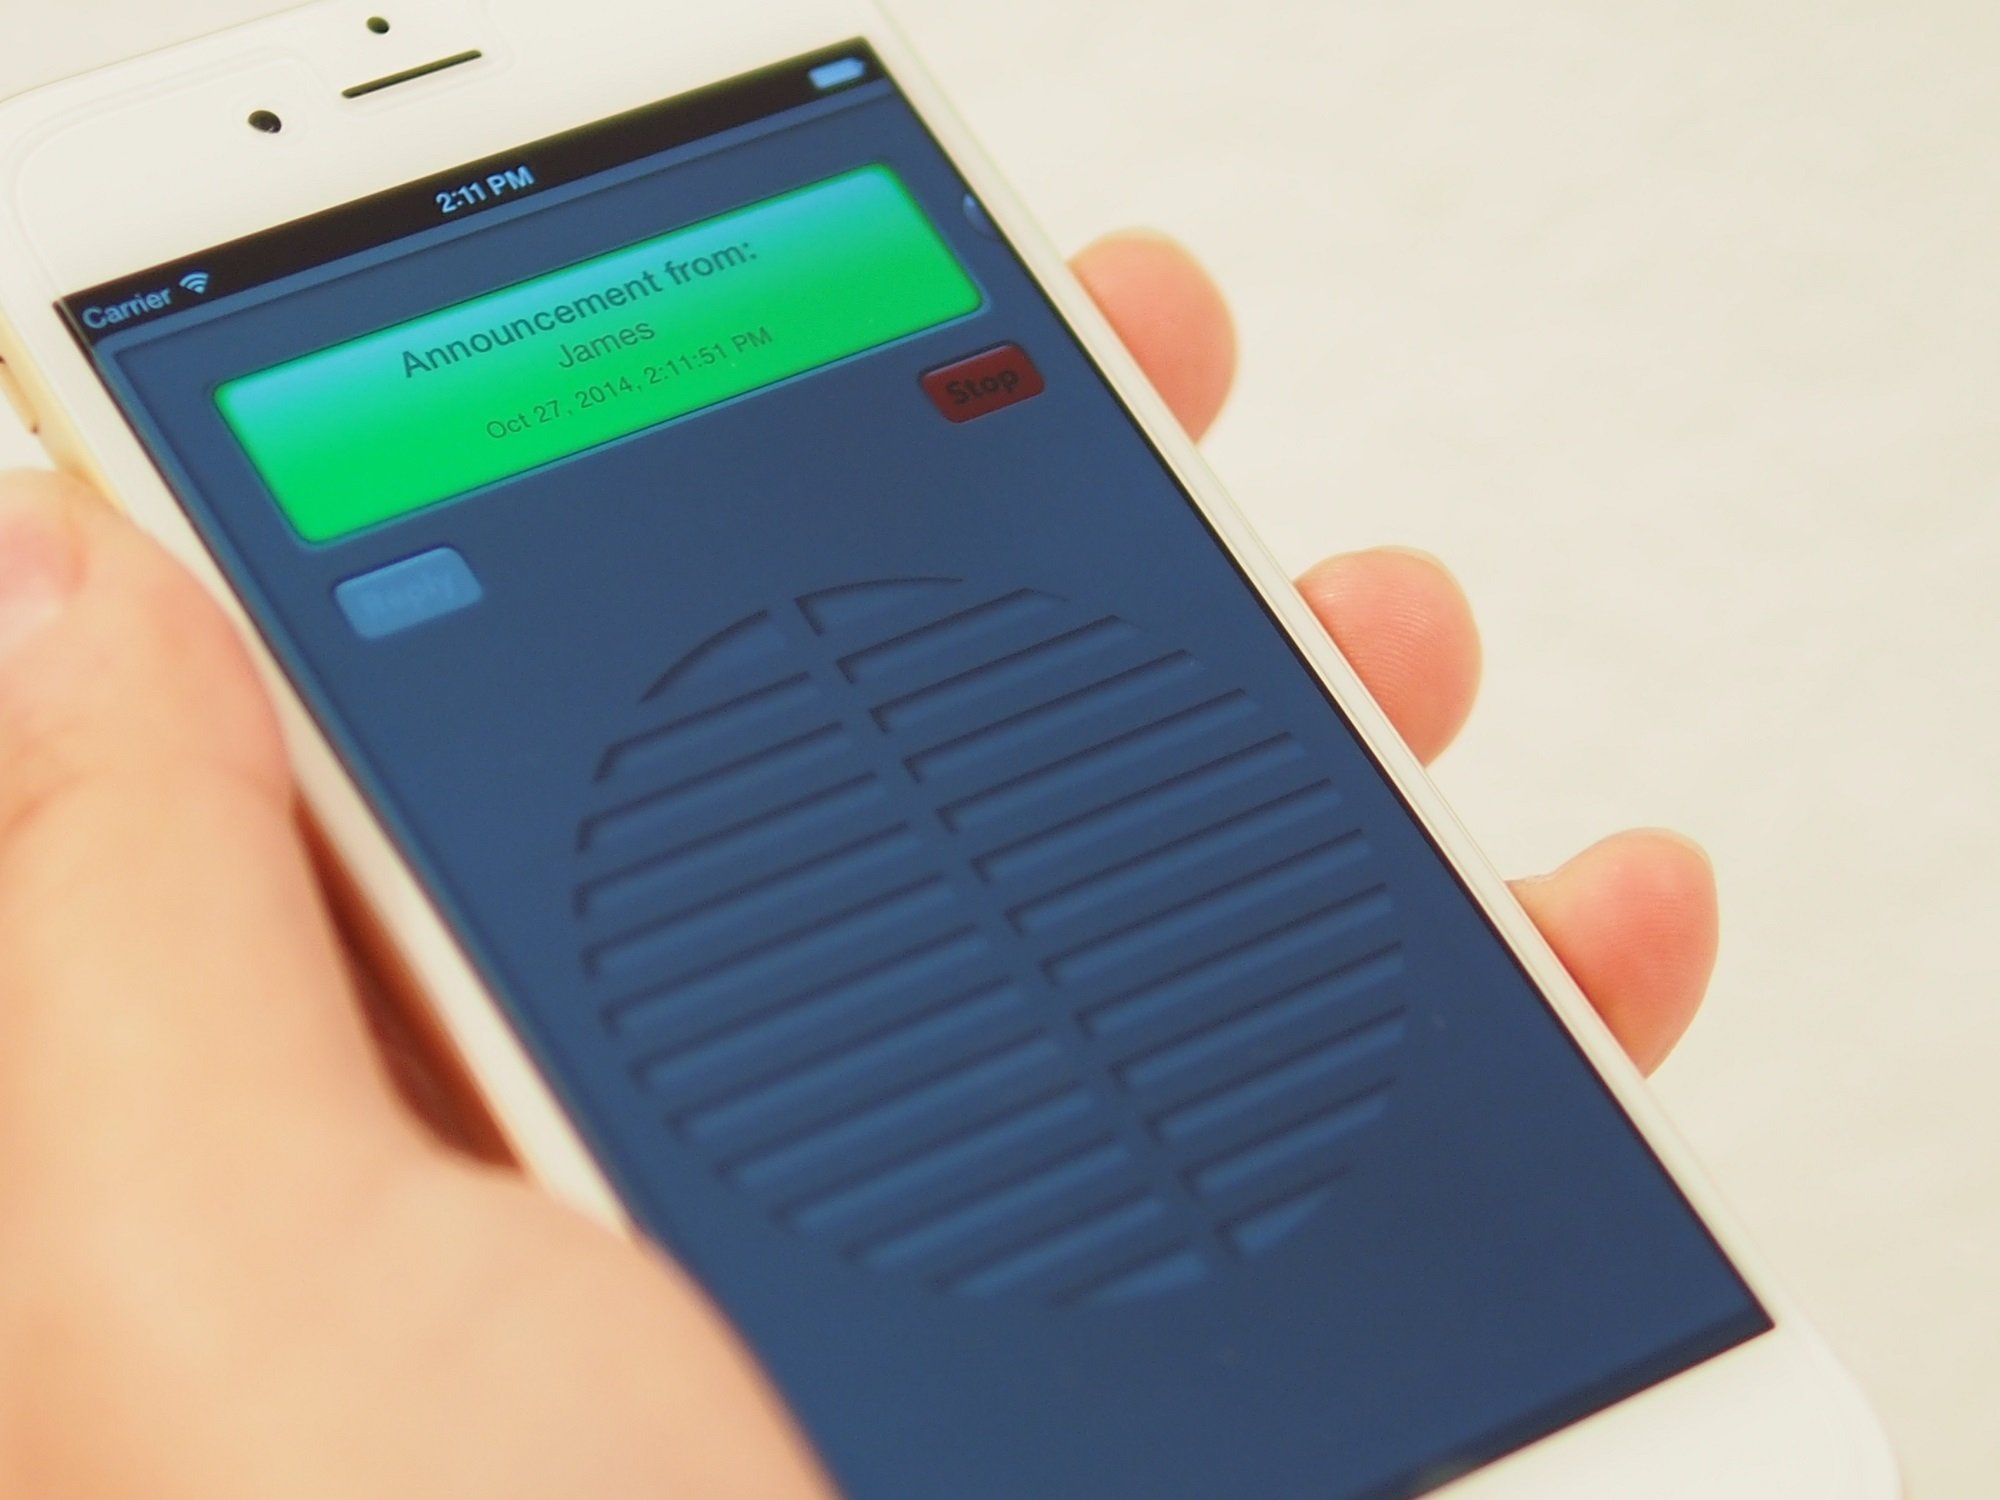 Echoes for iOS turns your iPhone into an intercom